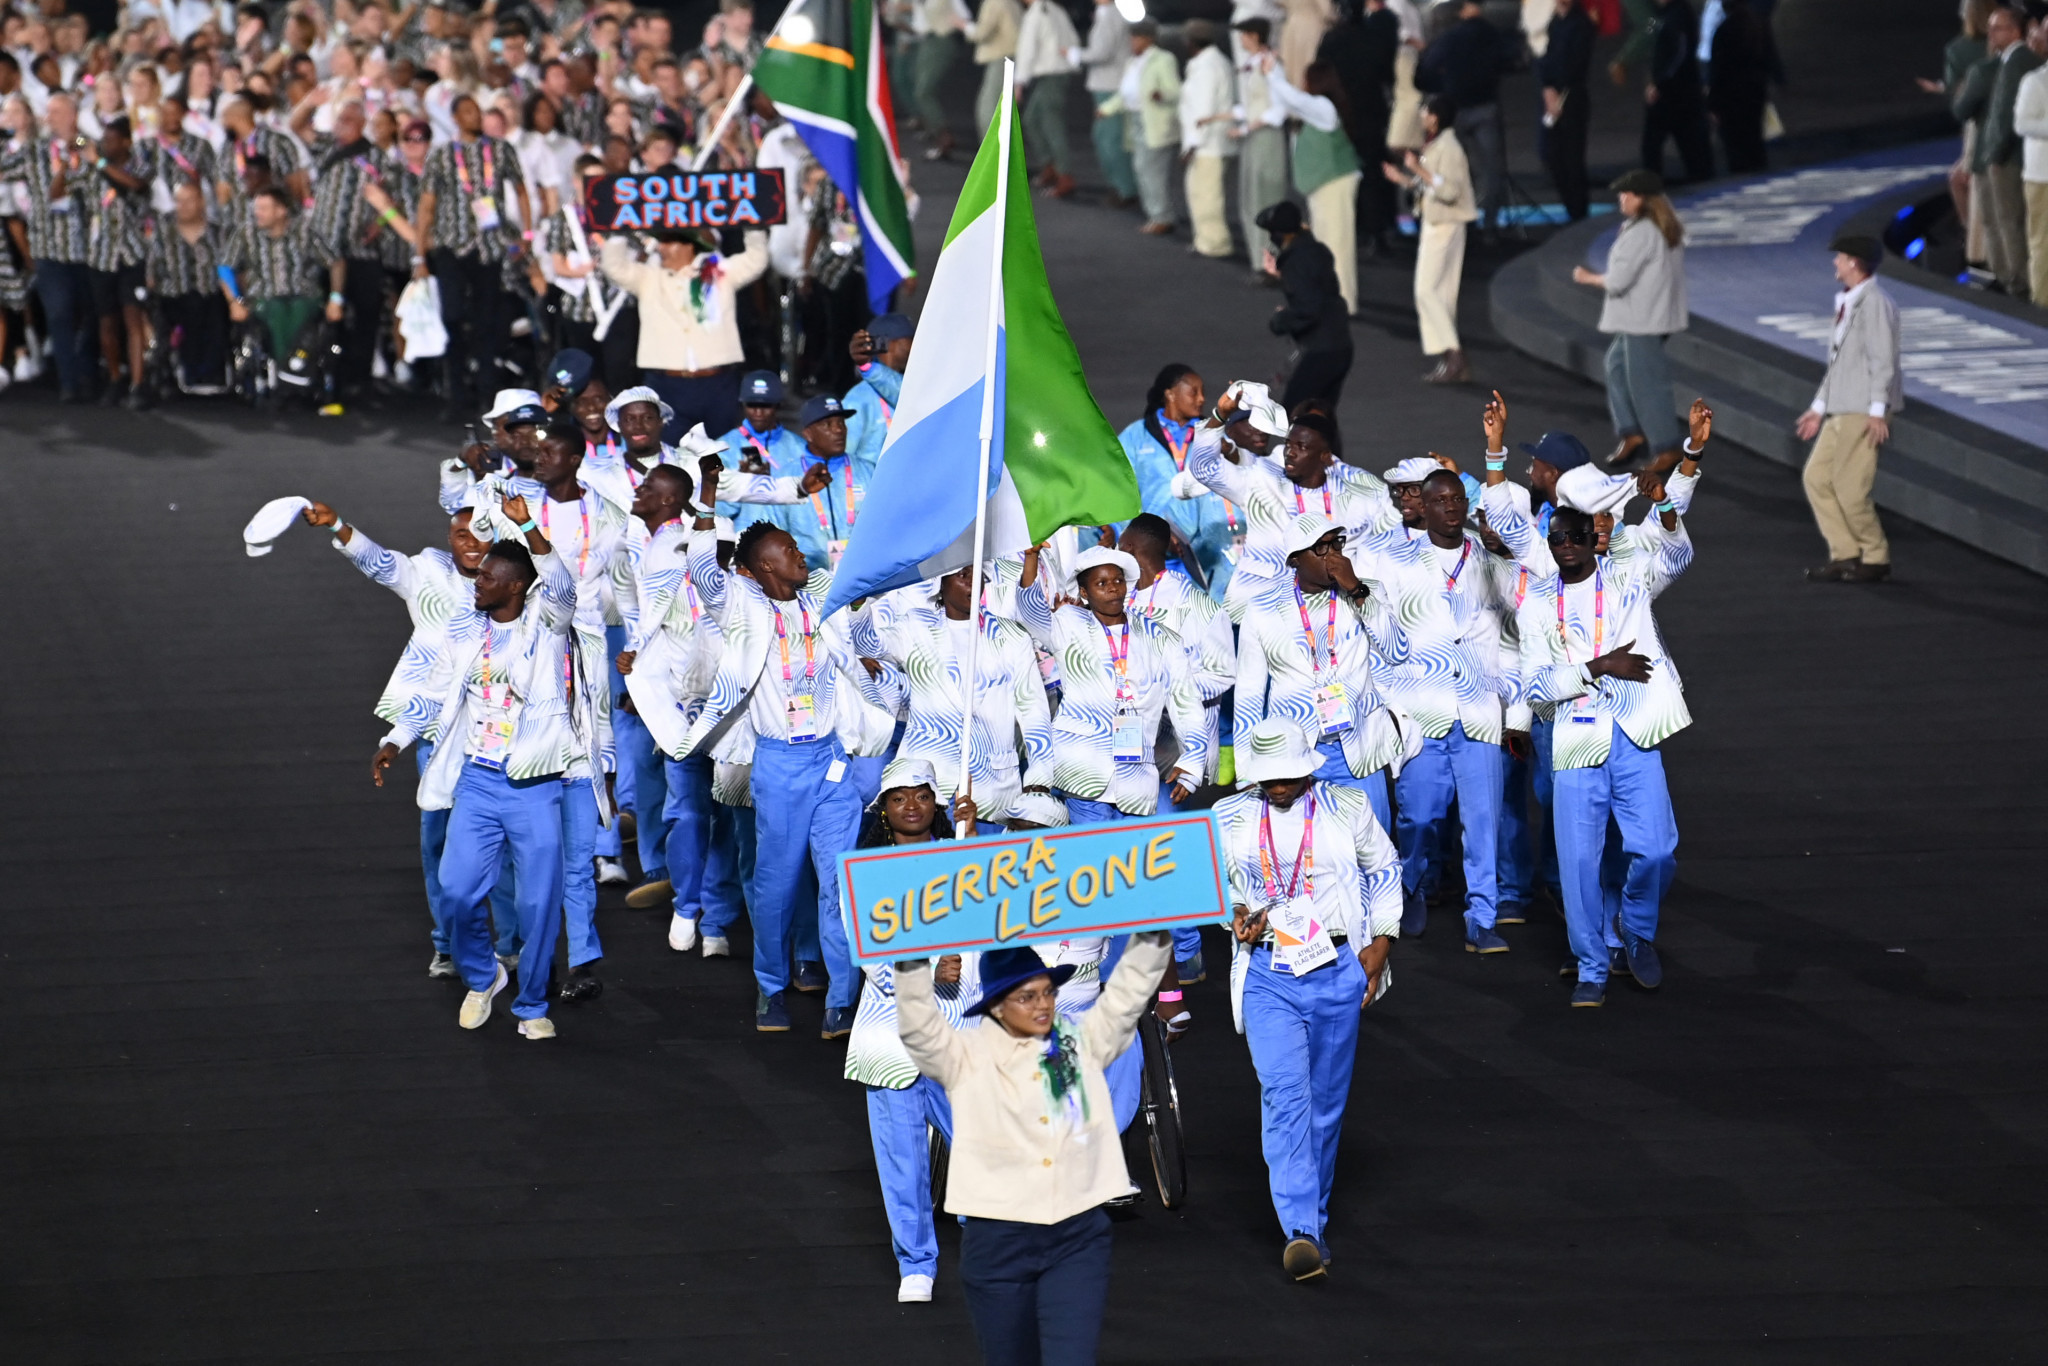 Sierra Leone is yet to win an Olympic and Commonwealth Games medal ©Getty Images